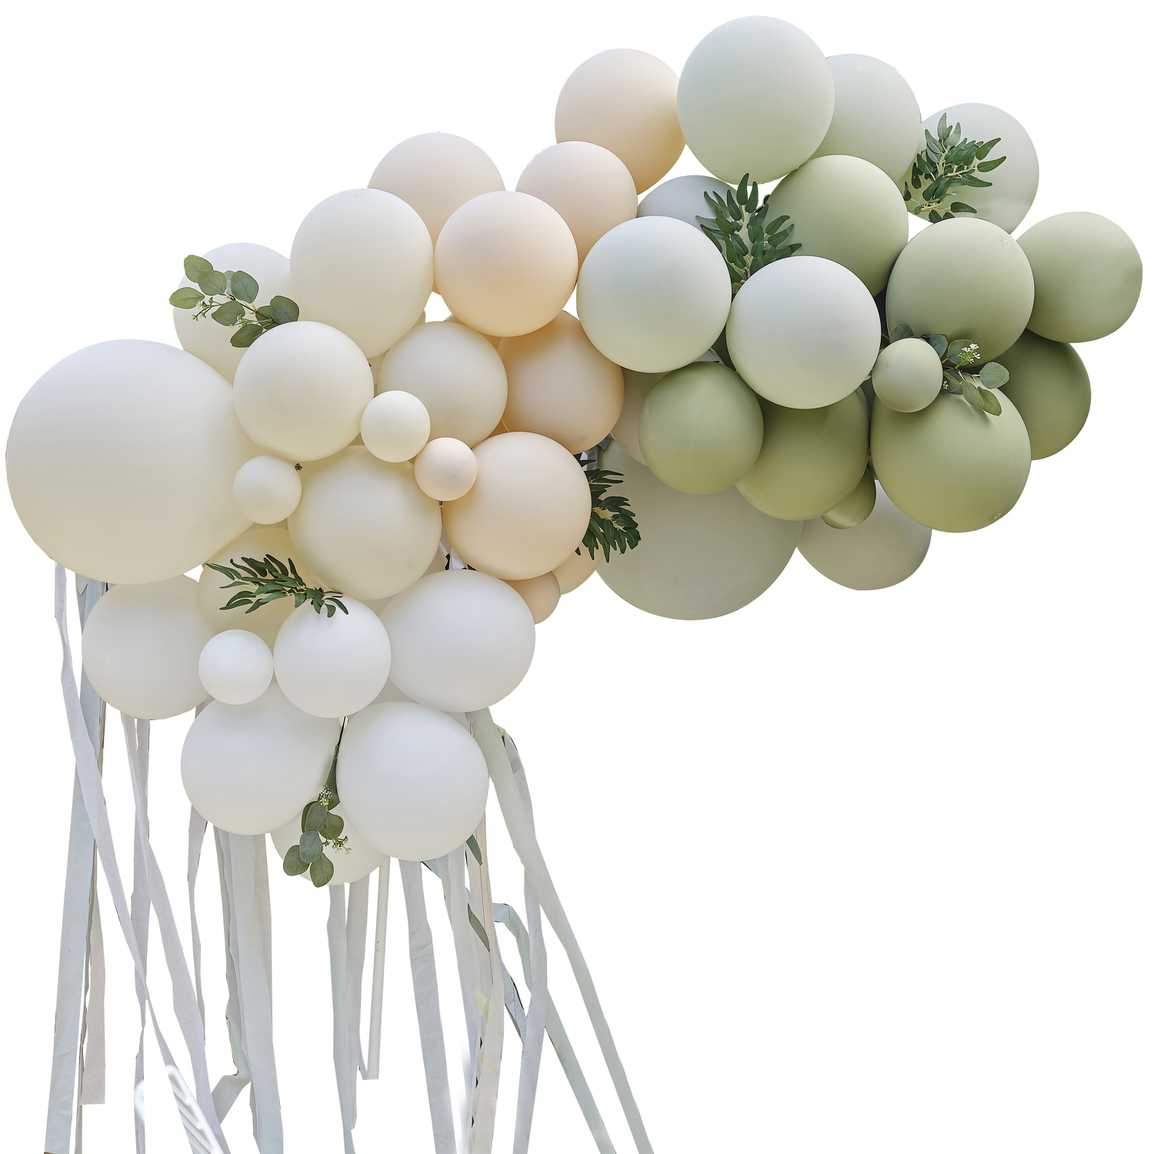 Ginger Ray Taupe, Peach & Sage Balloon Garland with Eucalyptus, Sage Foliage and Streamers